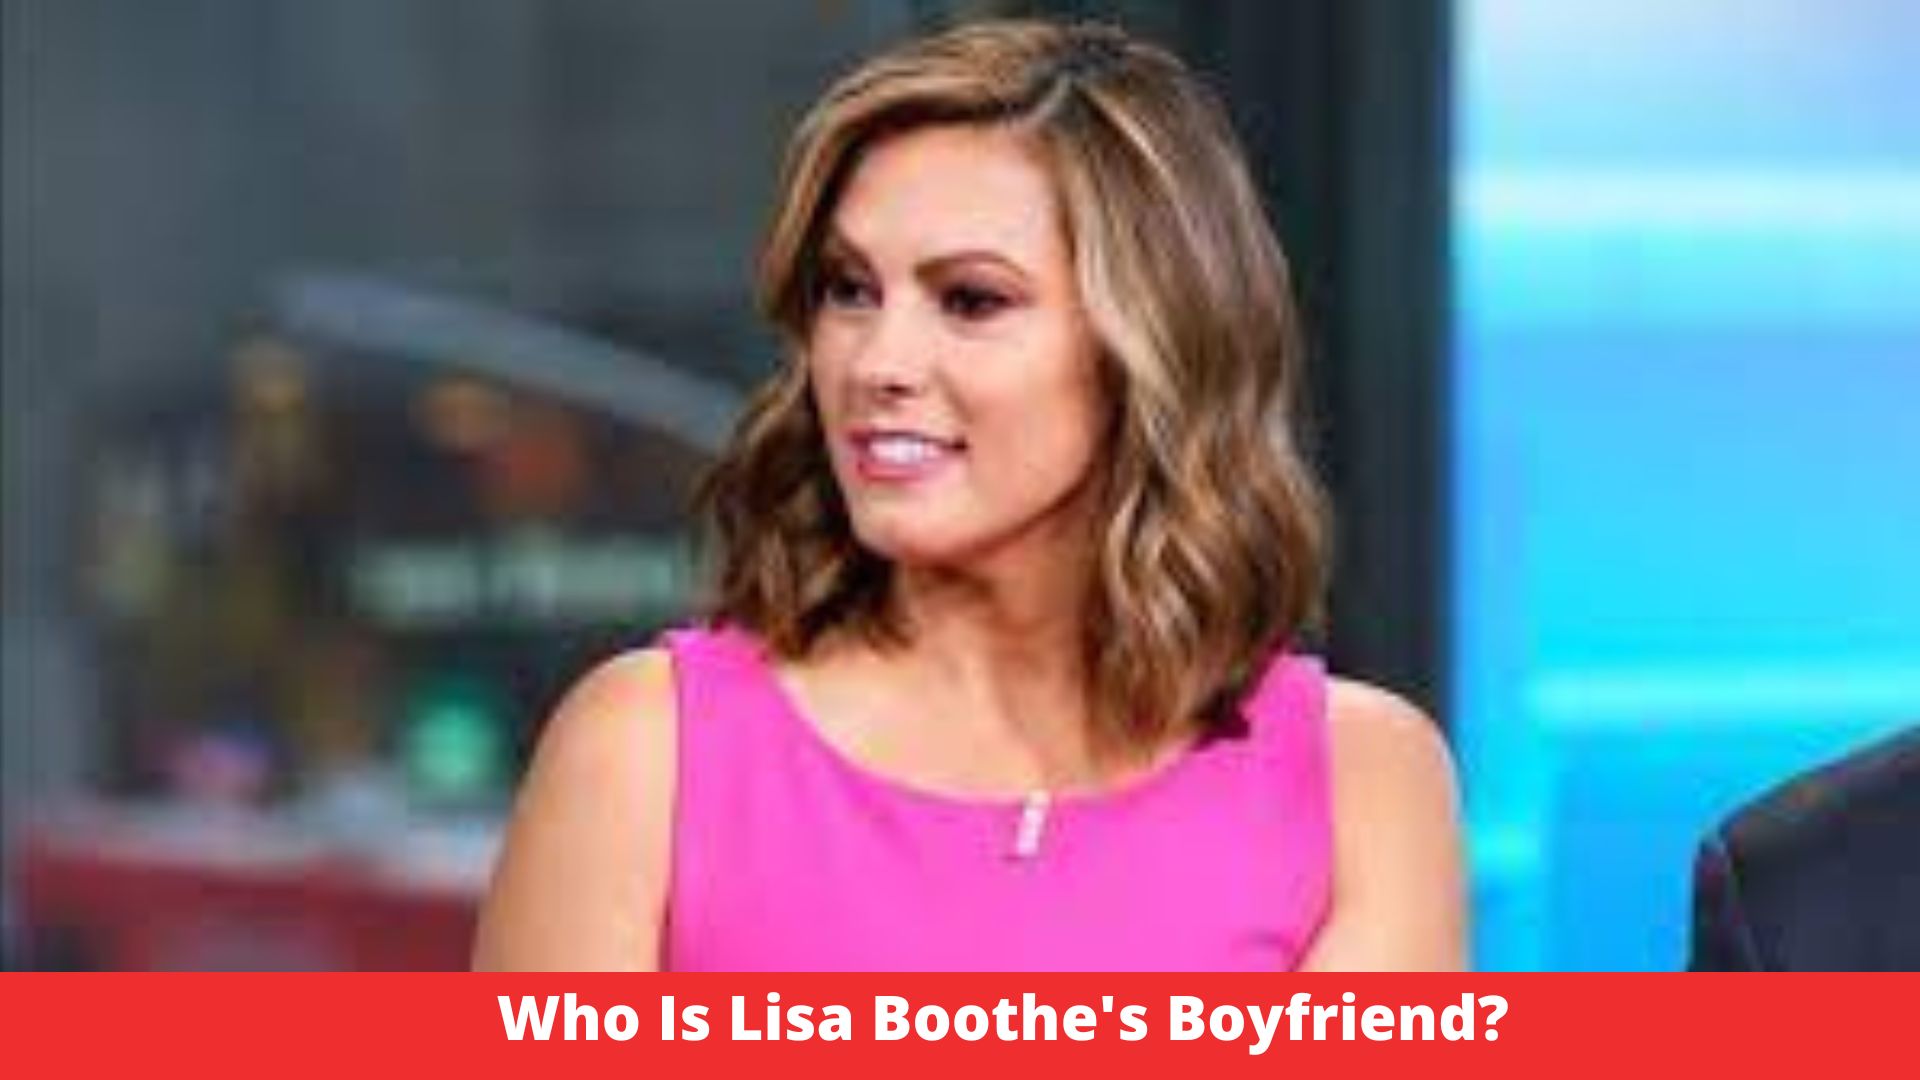 Who Is Lisa Boothe's Boyfriend?